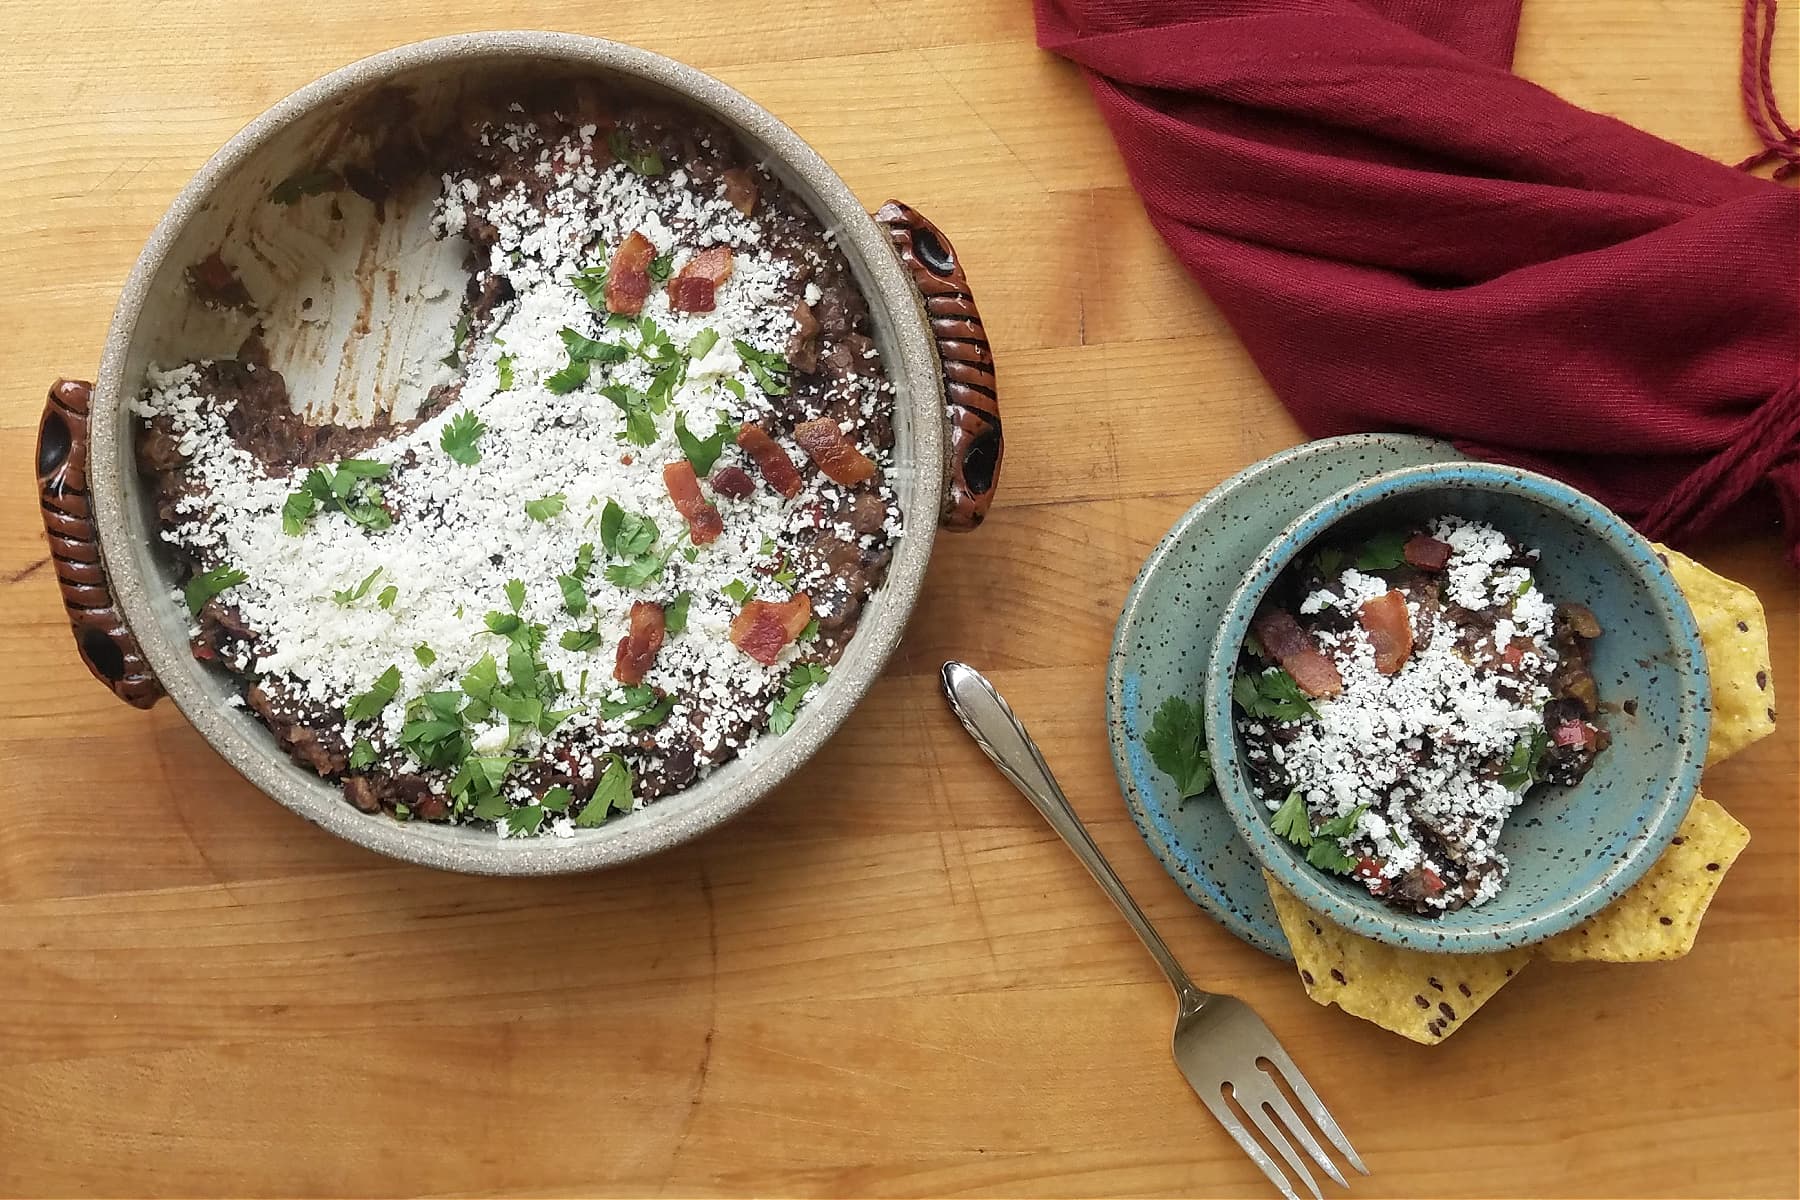 Round crockery casserole dish filled with cotija covered black beans, with one portion removed. Small pottery bowl with portion of black beans. Fork to the side.